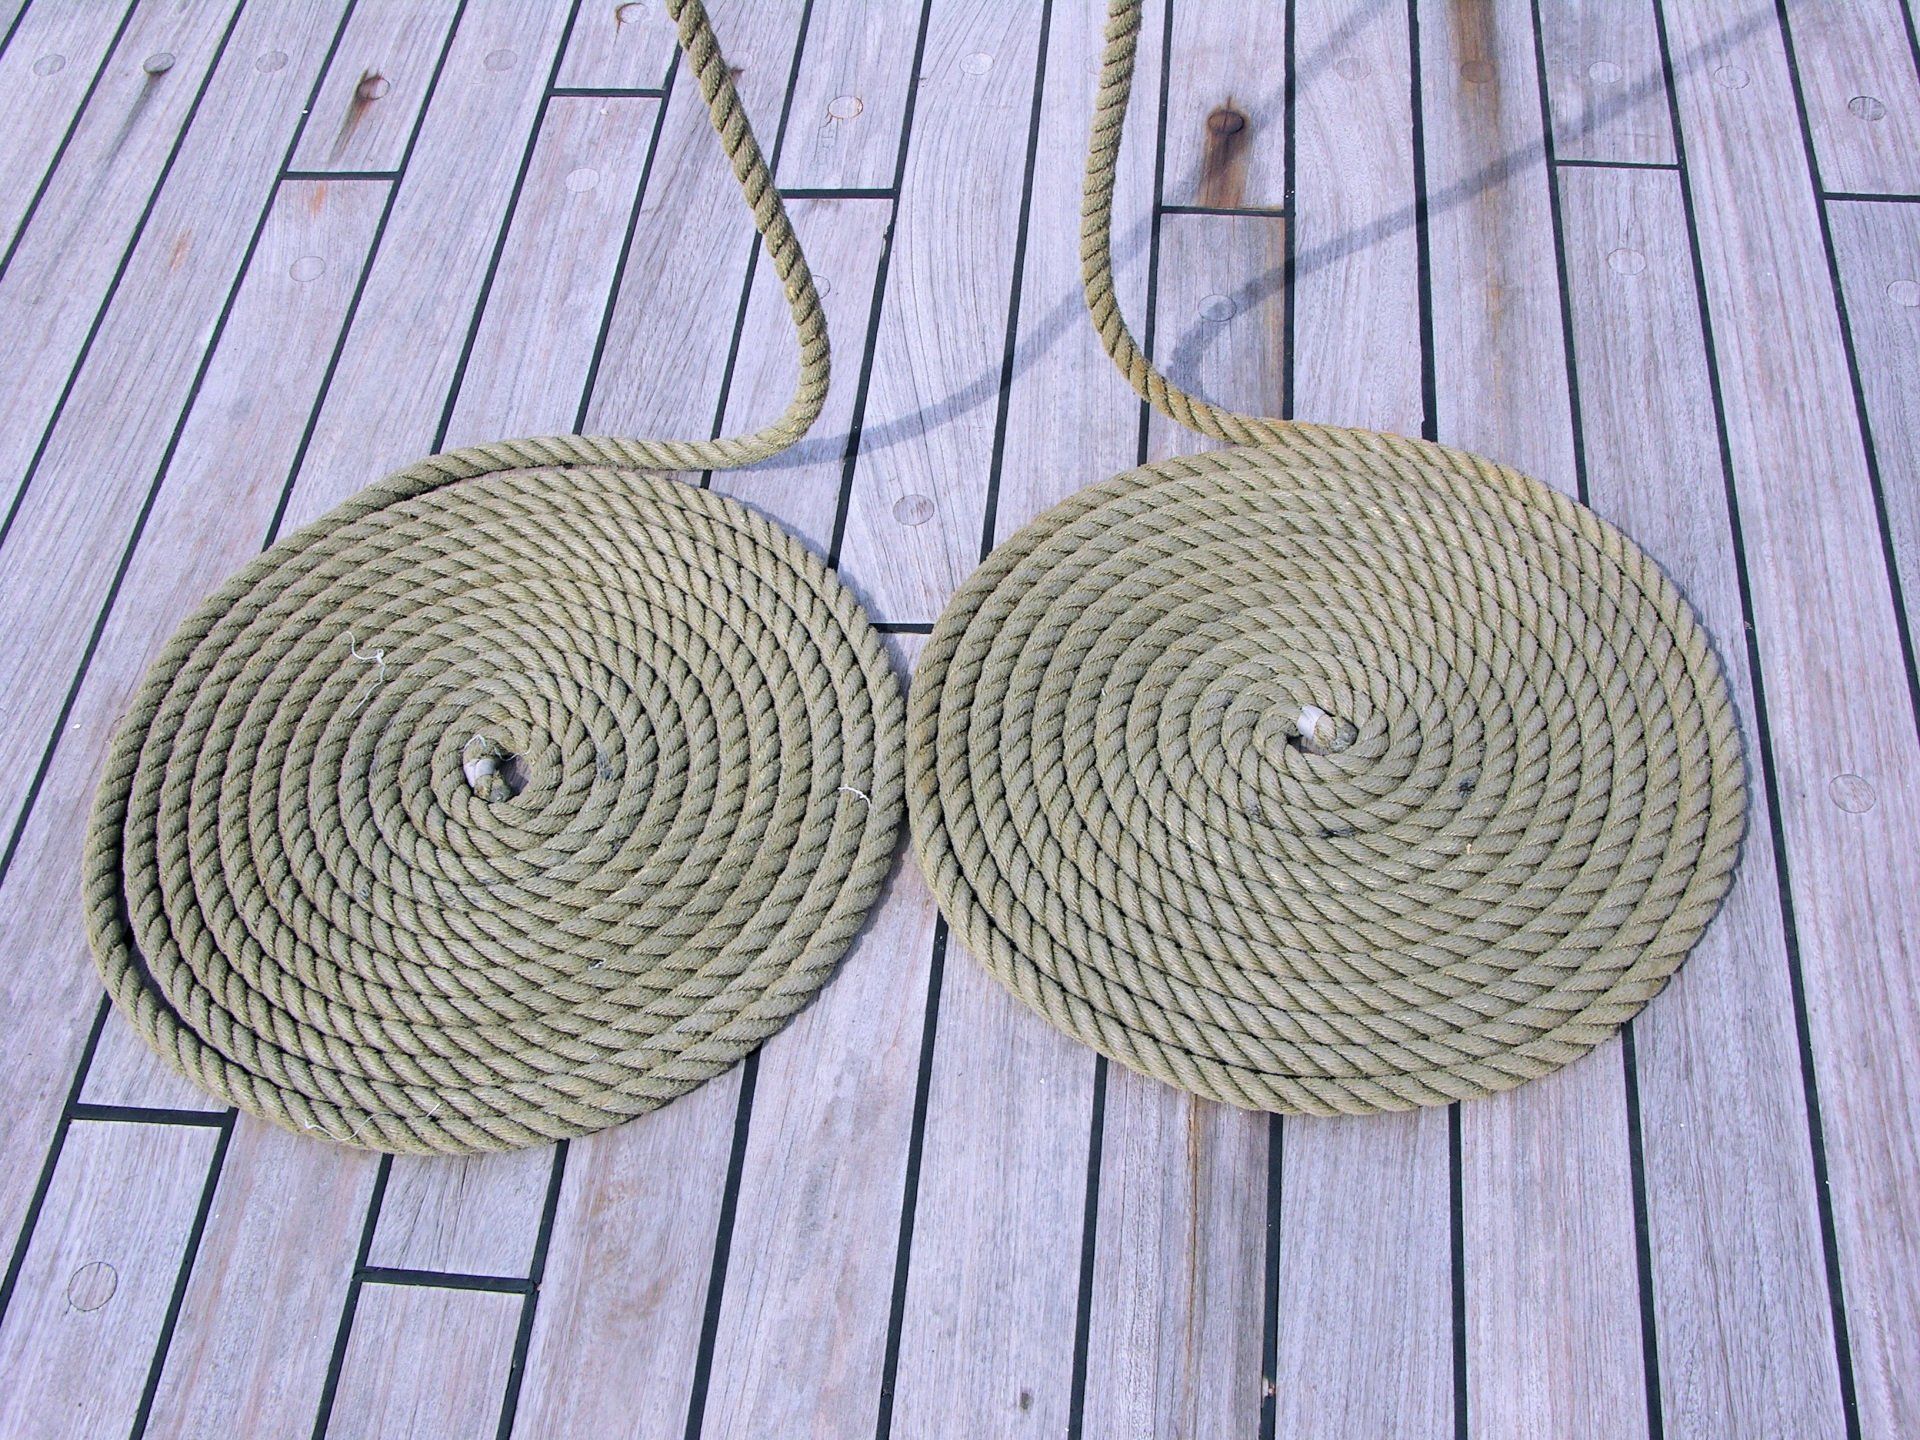 deck made of wood with two coiled ropes